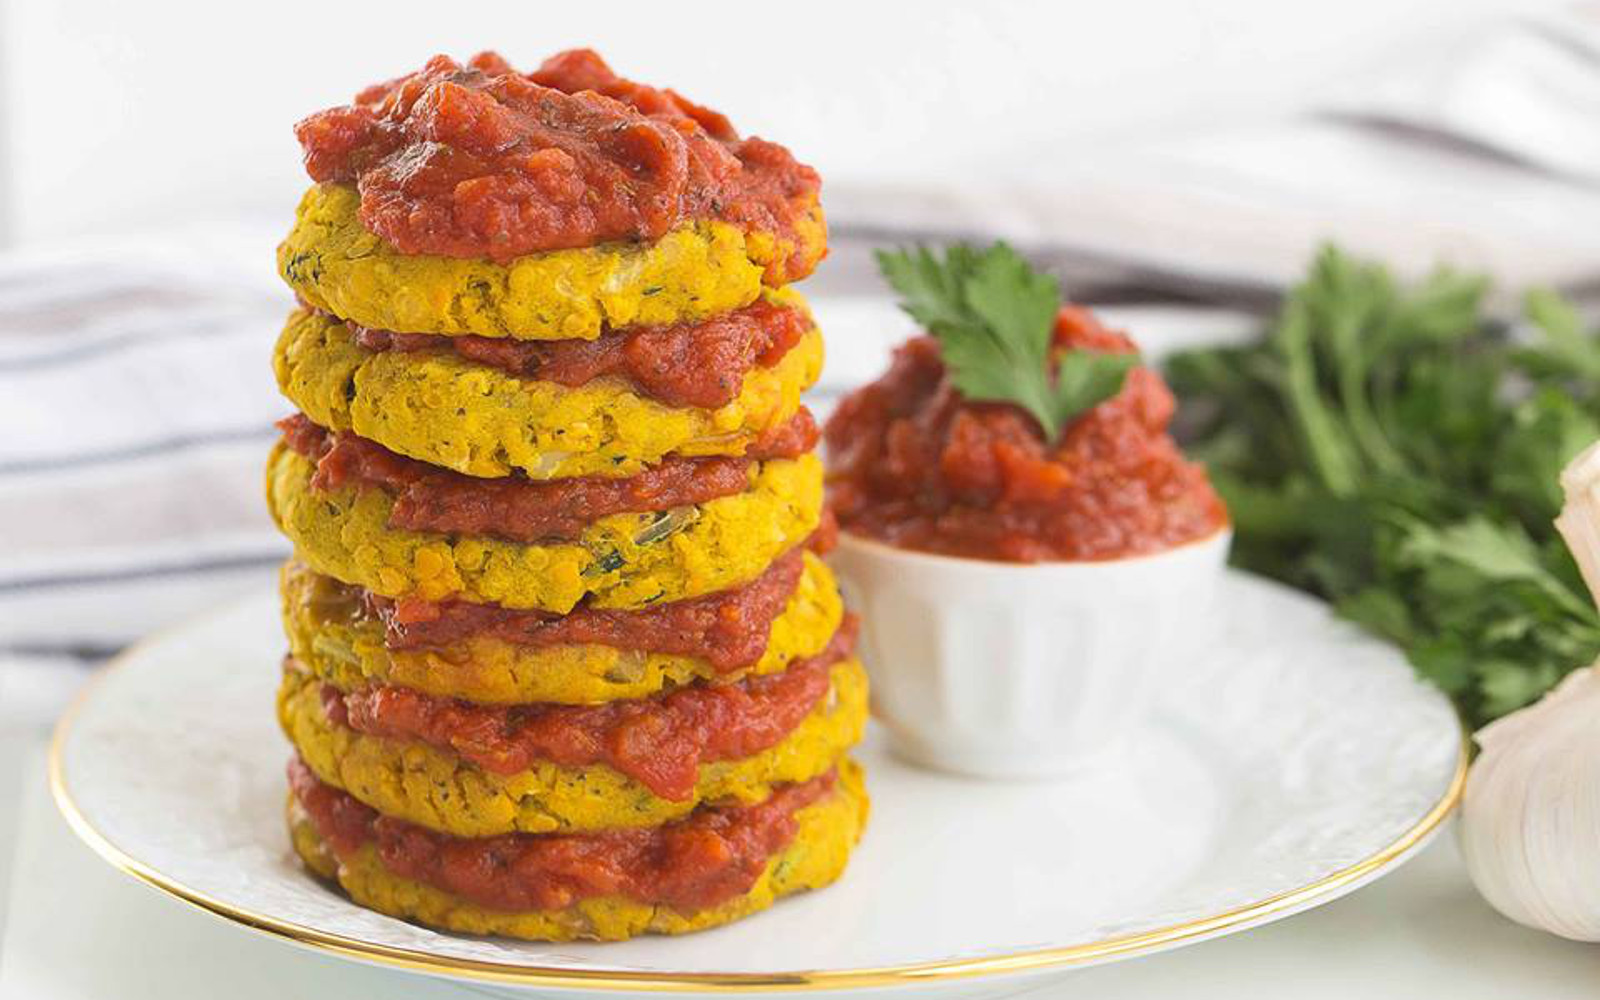 Red Lentil Patties With Tomato Sauce